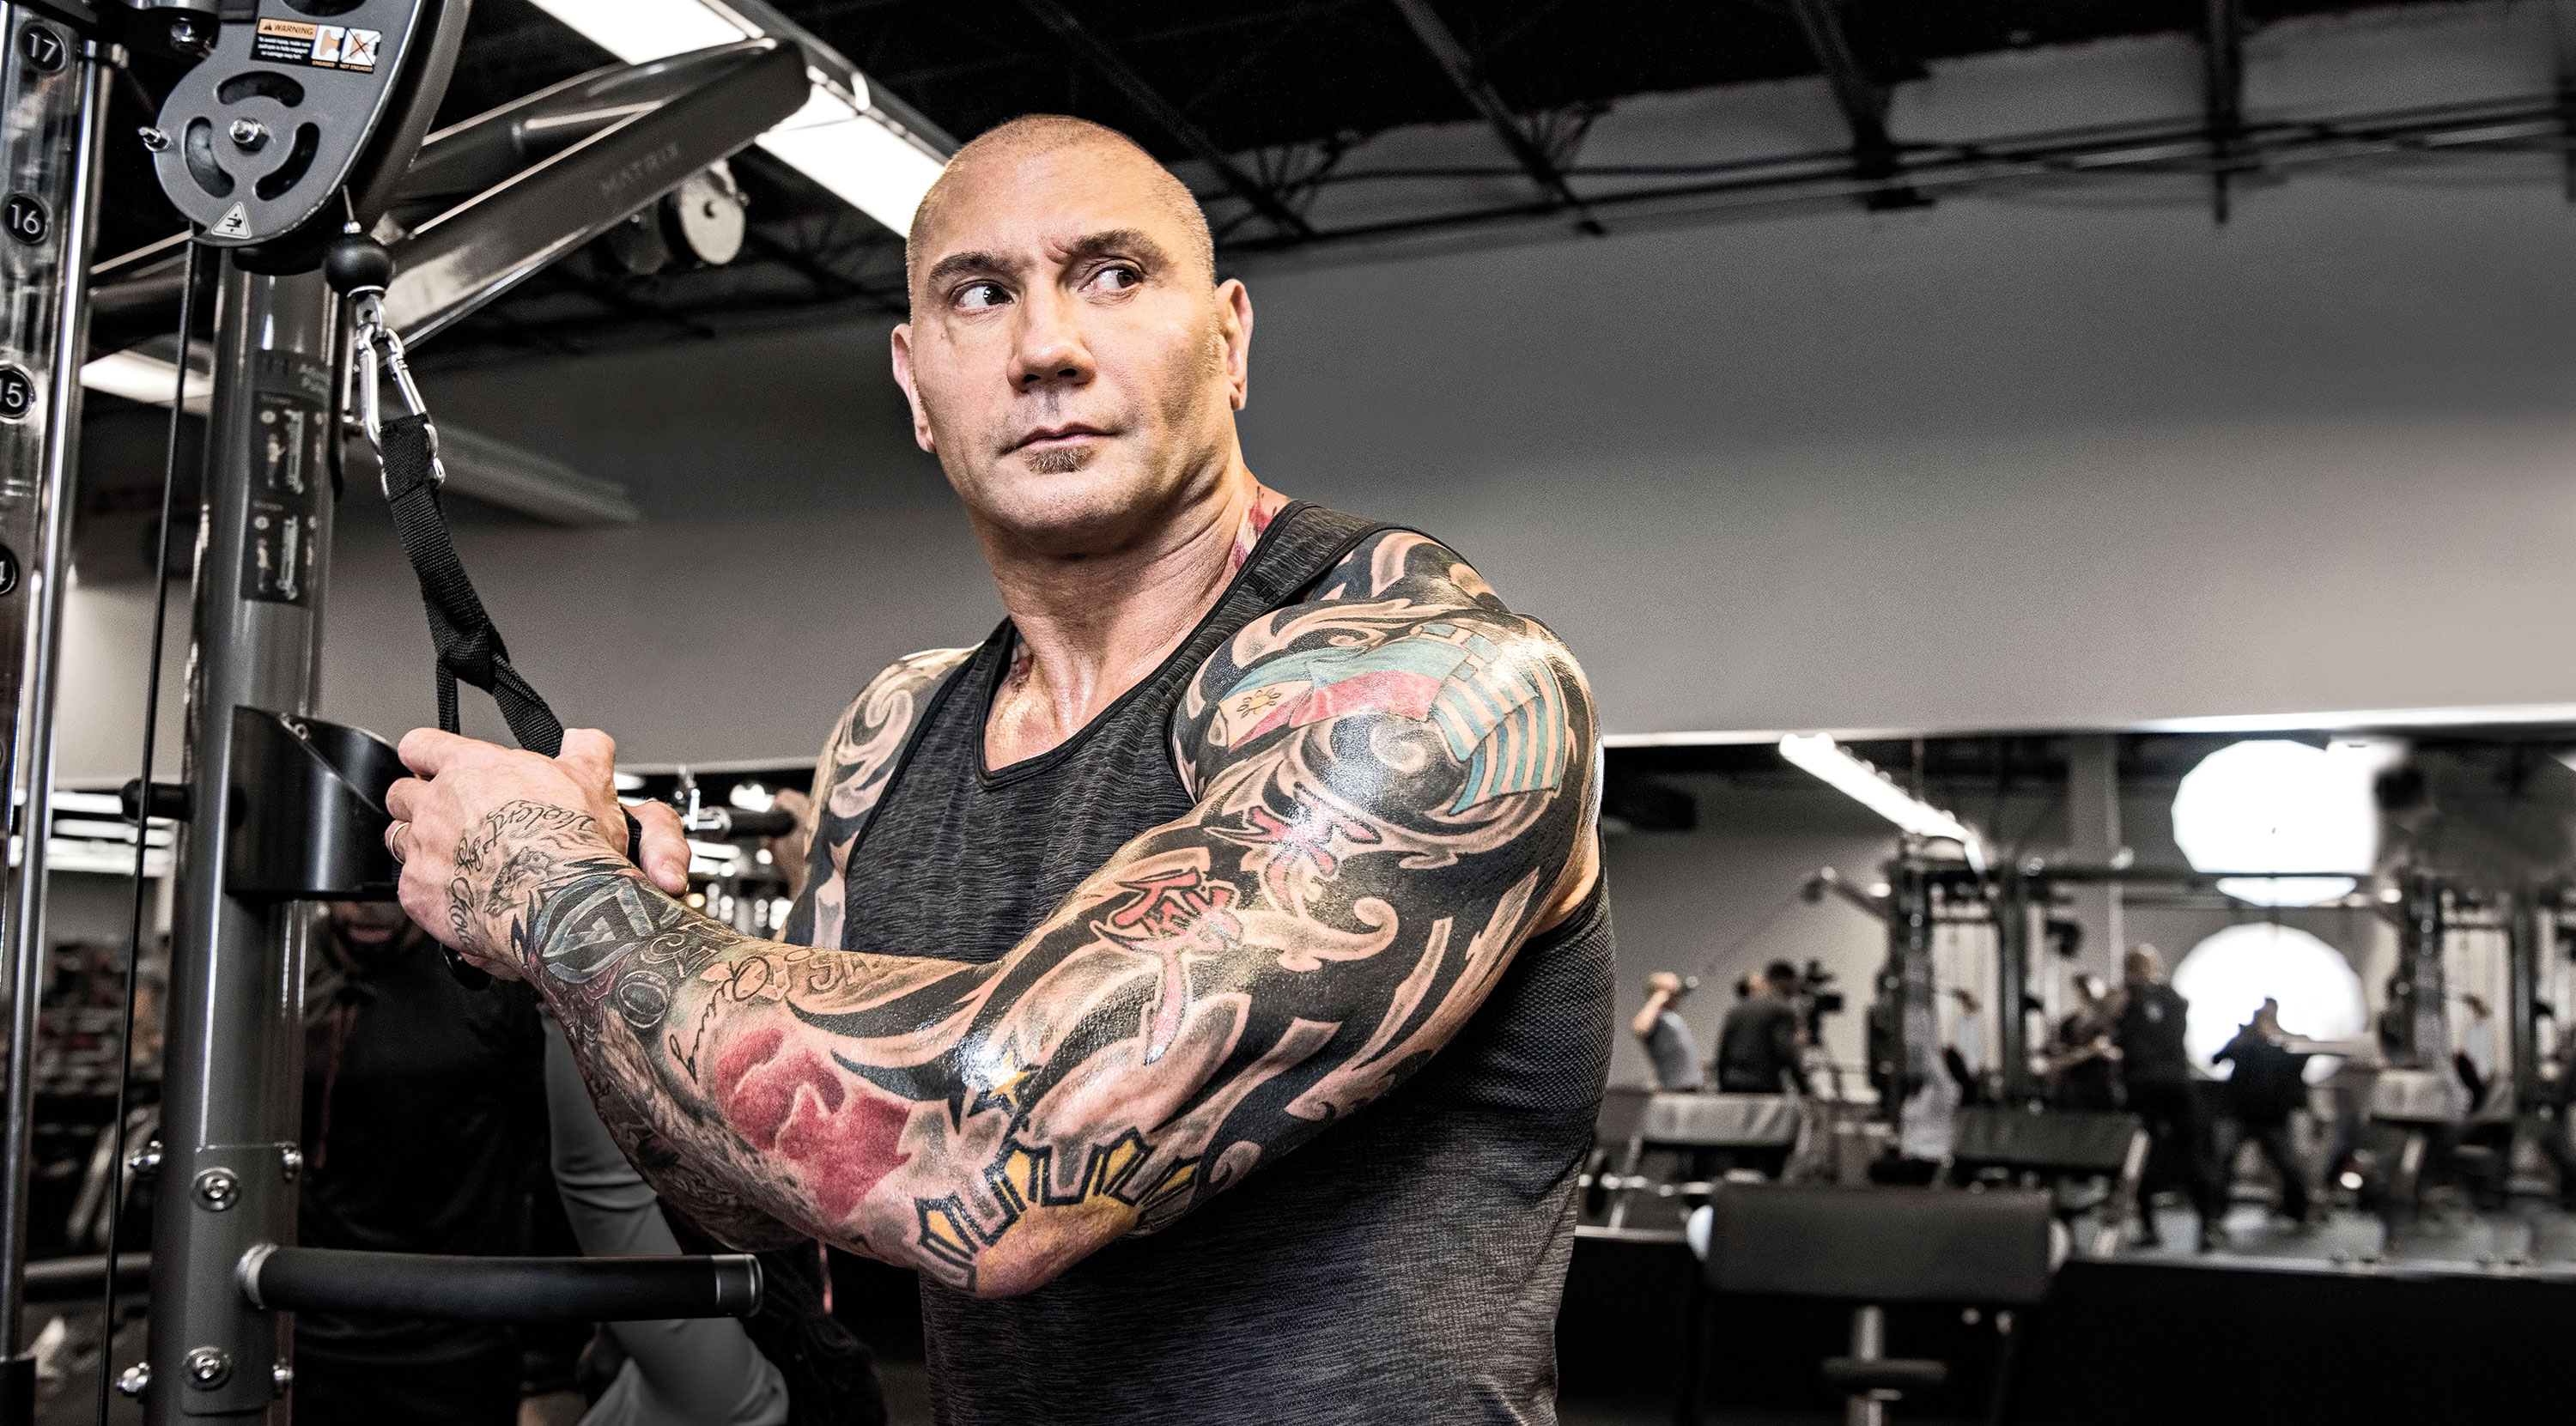 Dave Bautista MMA record: Dave Bautista MMA record: Was the 'Guardians of  the Galaxy' star a fighter? Here's his combat sports past